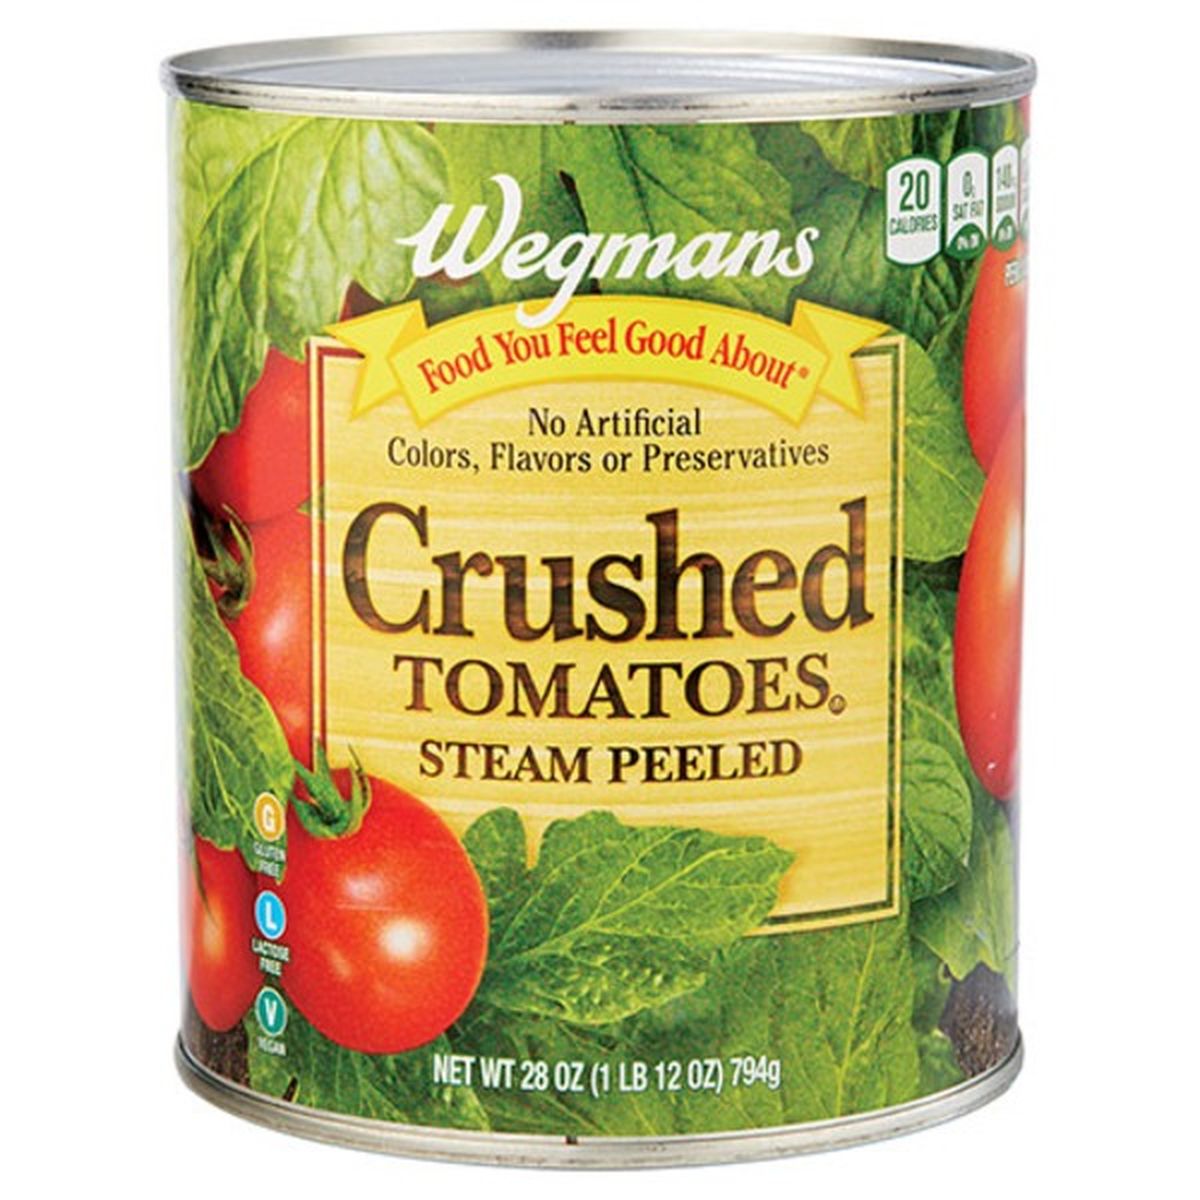 Calories in Wegmans Crushed Tomatoes